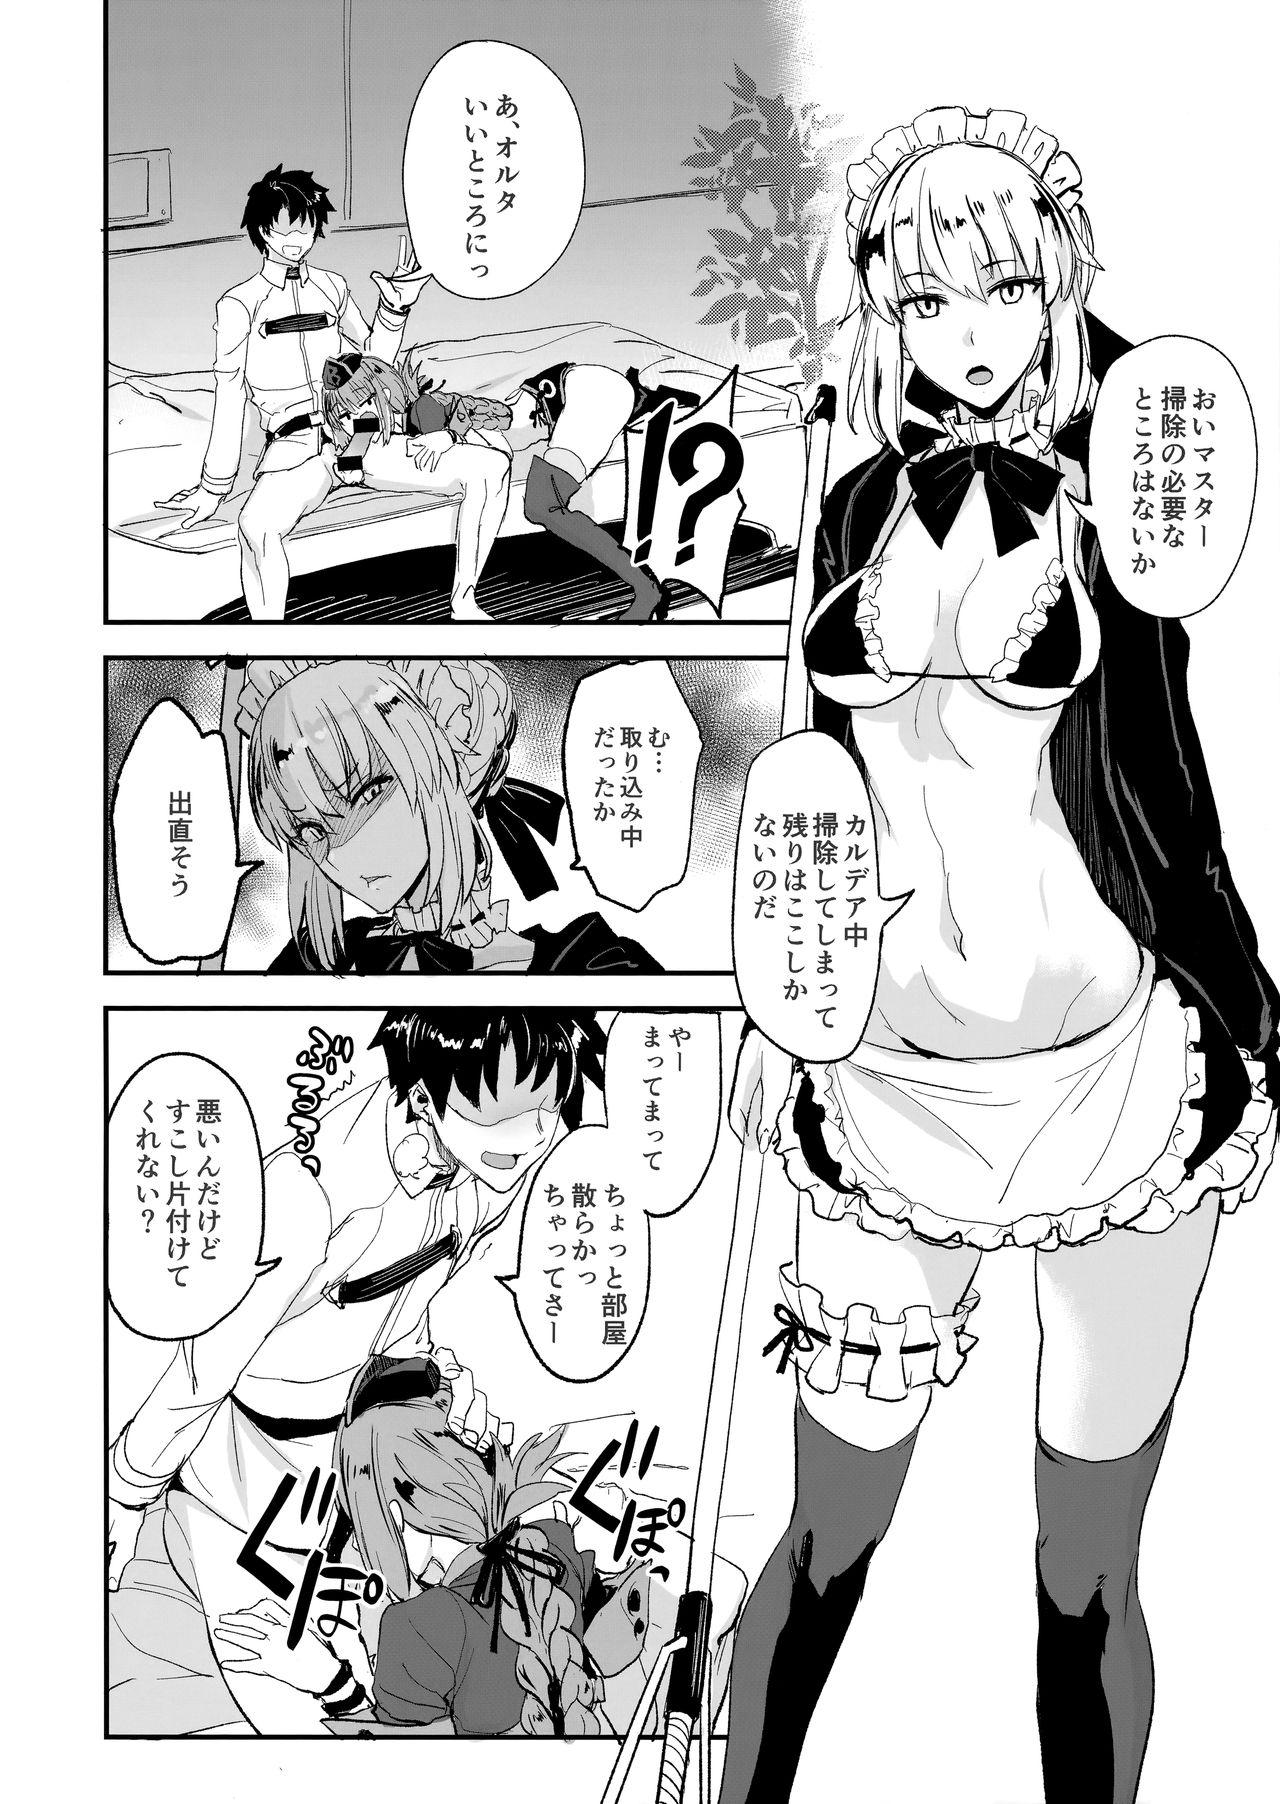 People Having Sex FGO no Erohon 2 - Fate grand order Best Blowjobs Ever - Page 5